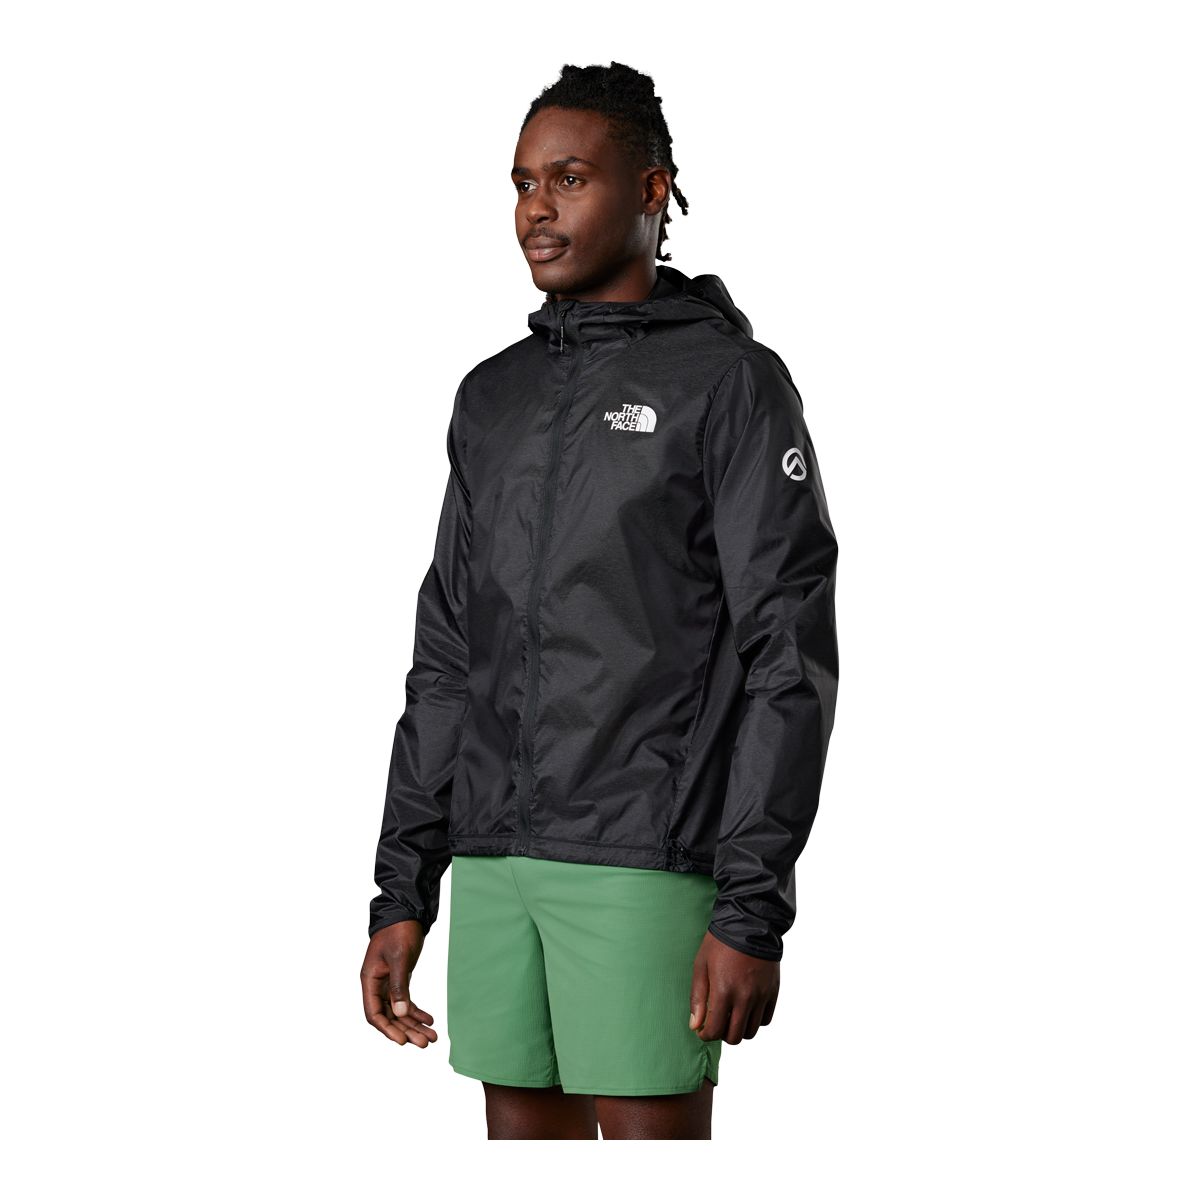 https://media-www.sportchek.ca/product/div-03-softgoods/dpt-76-outerwear/sdpt-01-mens/334000961/the-north-face-men-s-summit-superior-wind-shell-jacket-42b33072-12e7-45c8-8bfc-5baf1e7fc554-jpgrendition.jpg?imdensity=1&imwidth=1244&impolicy=mZoom